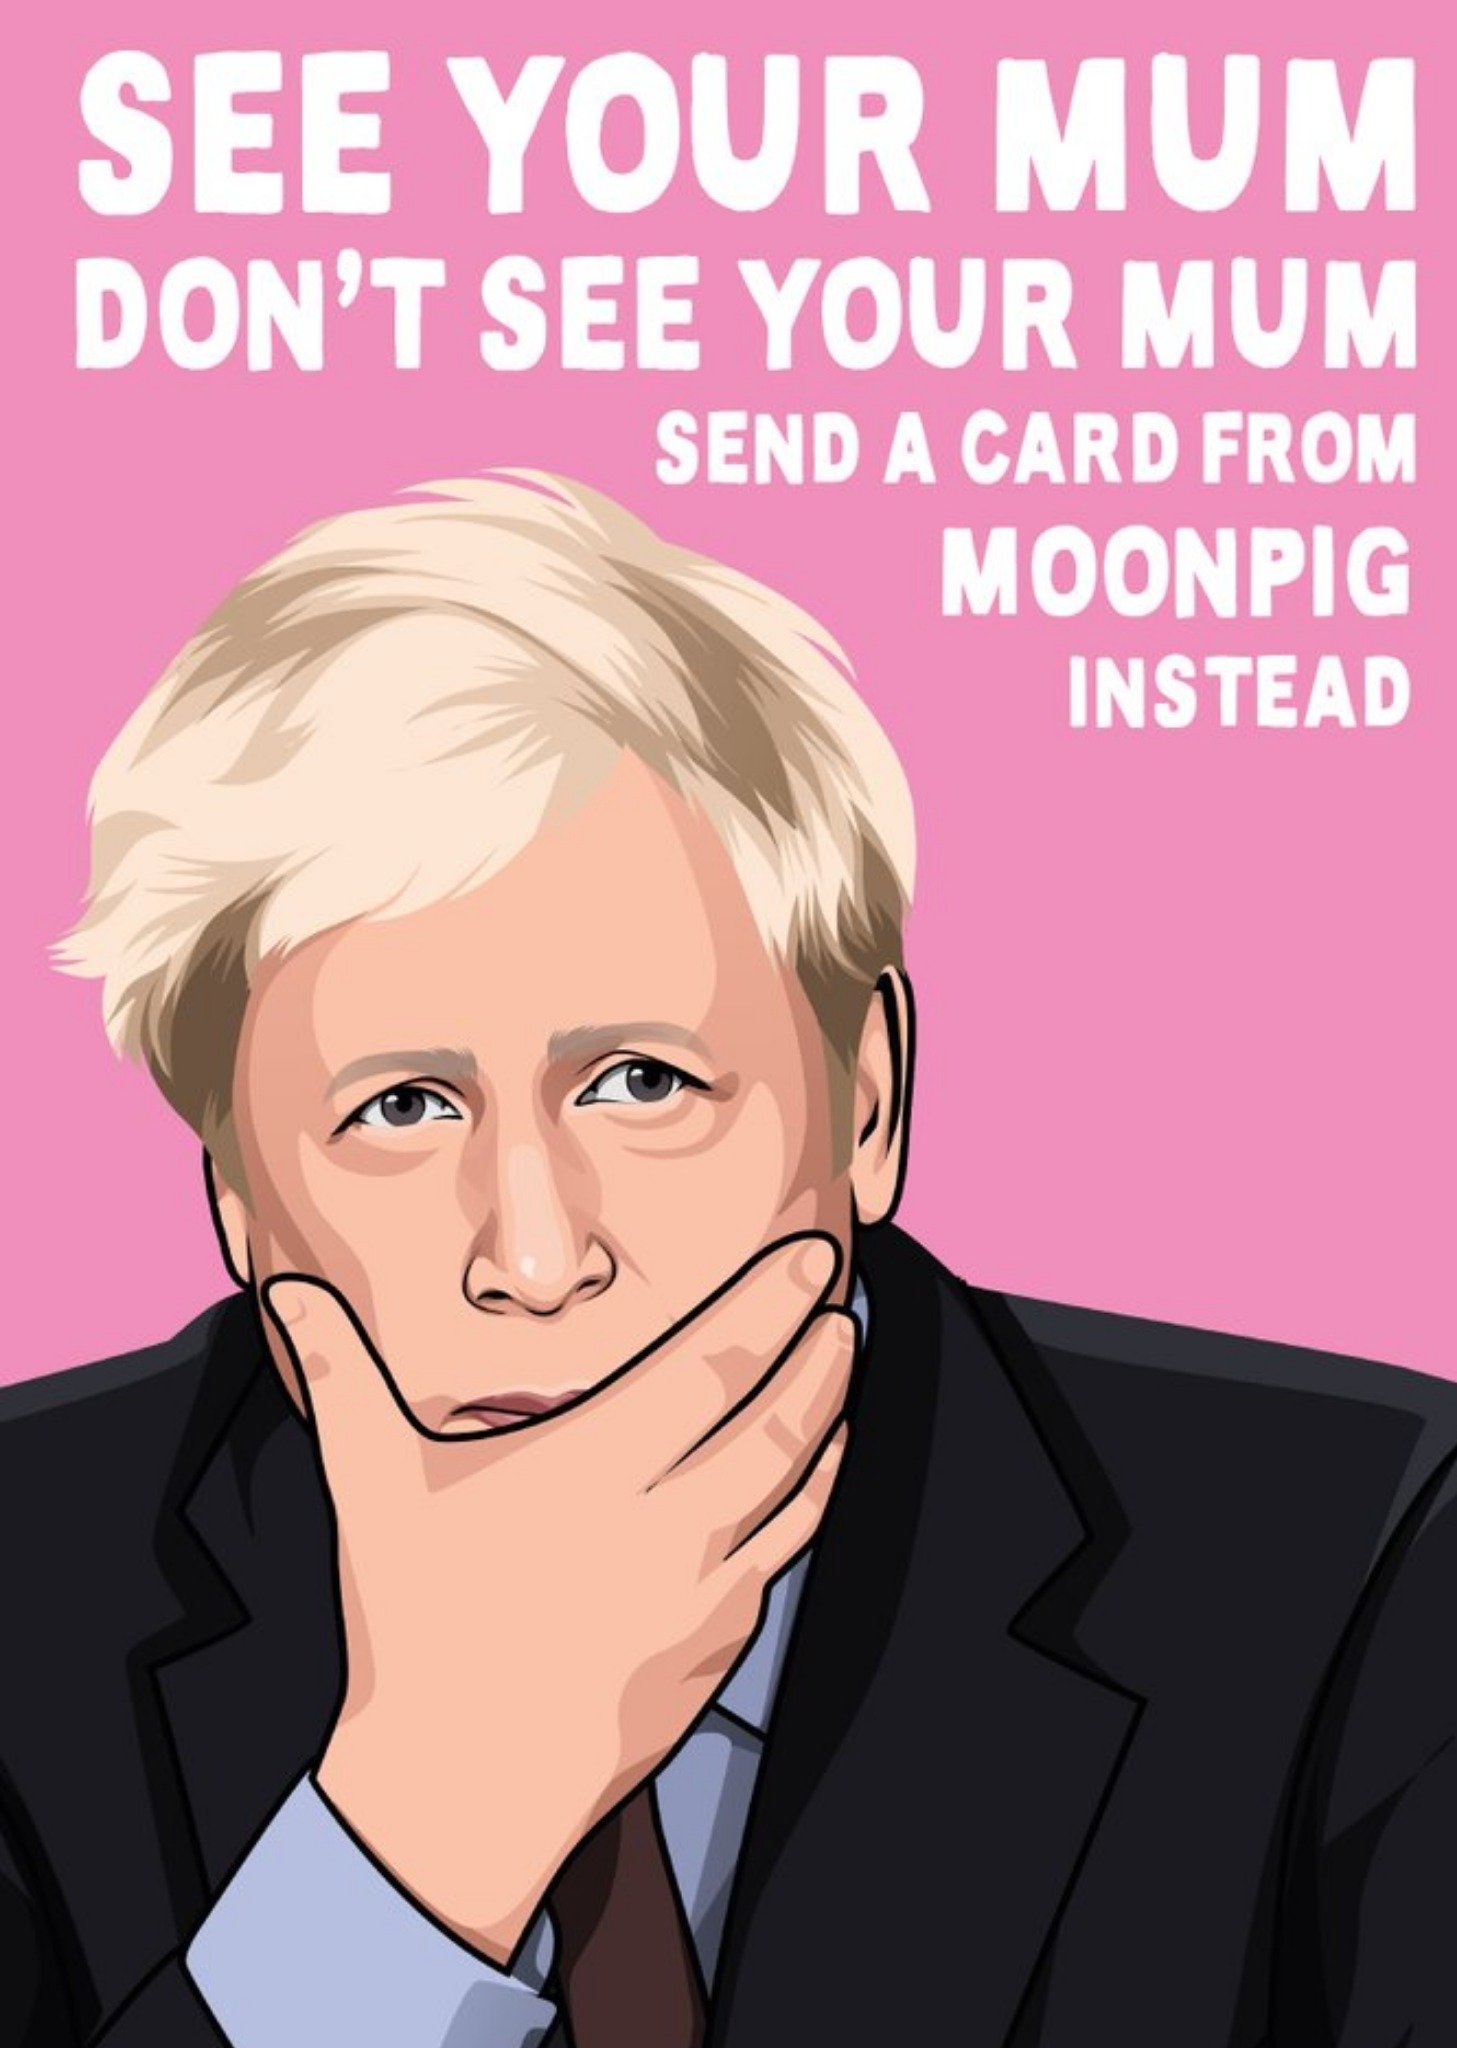 All Things Banter Covid Funny Send A Card From Moonpig Instead Card, Large